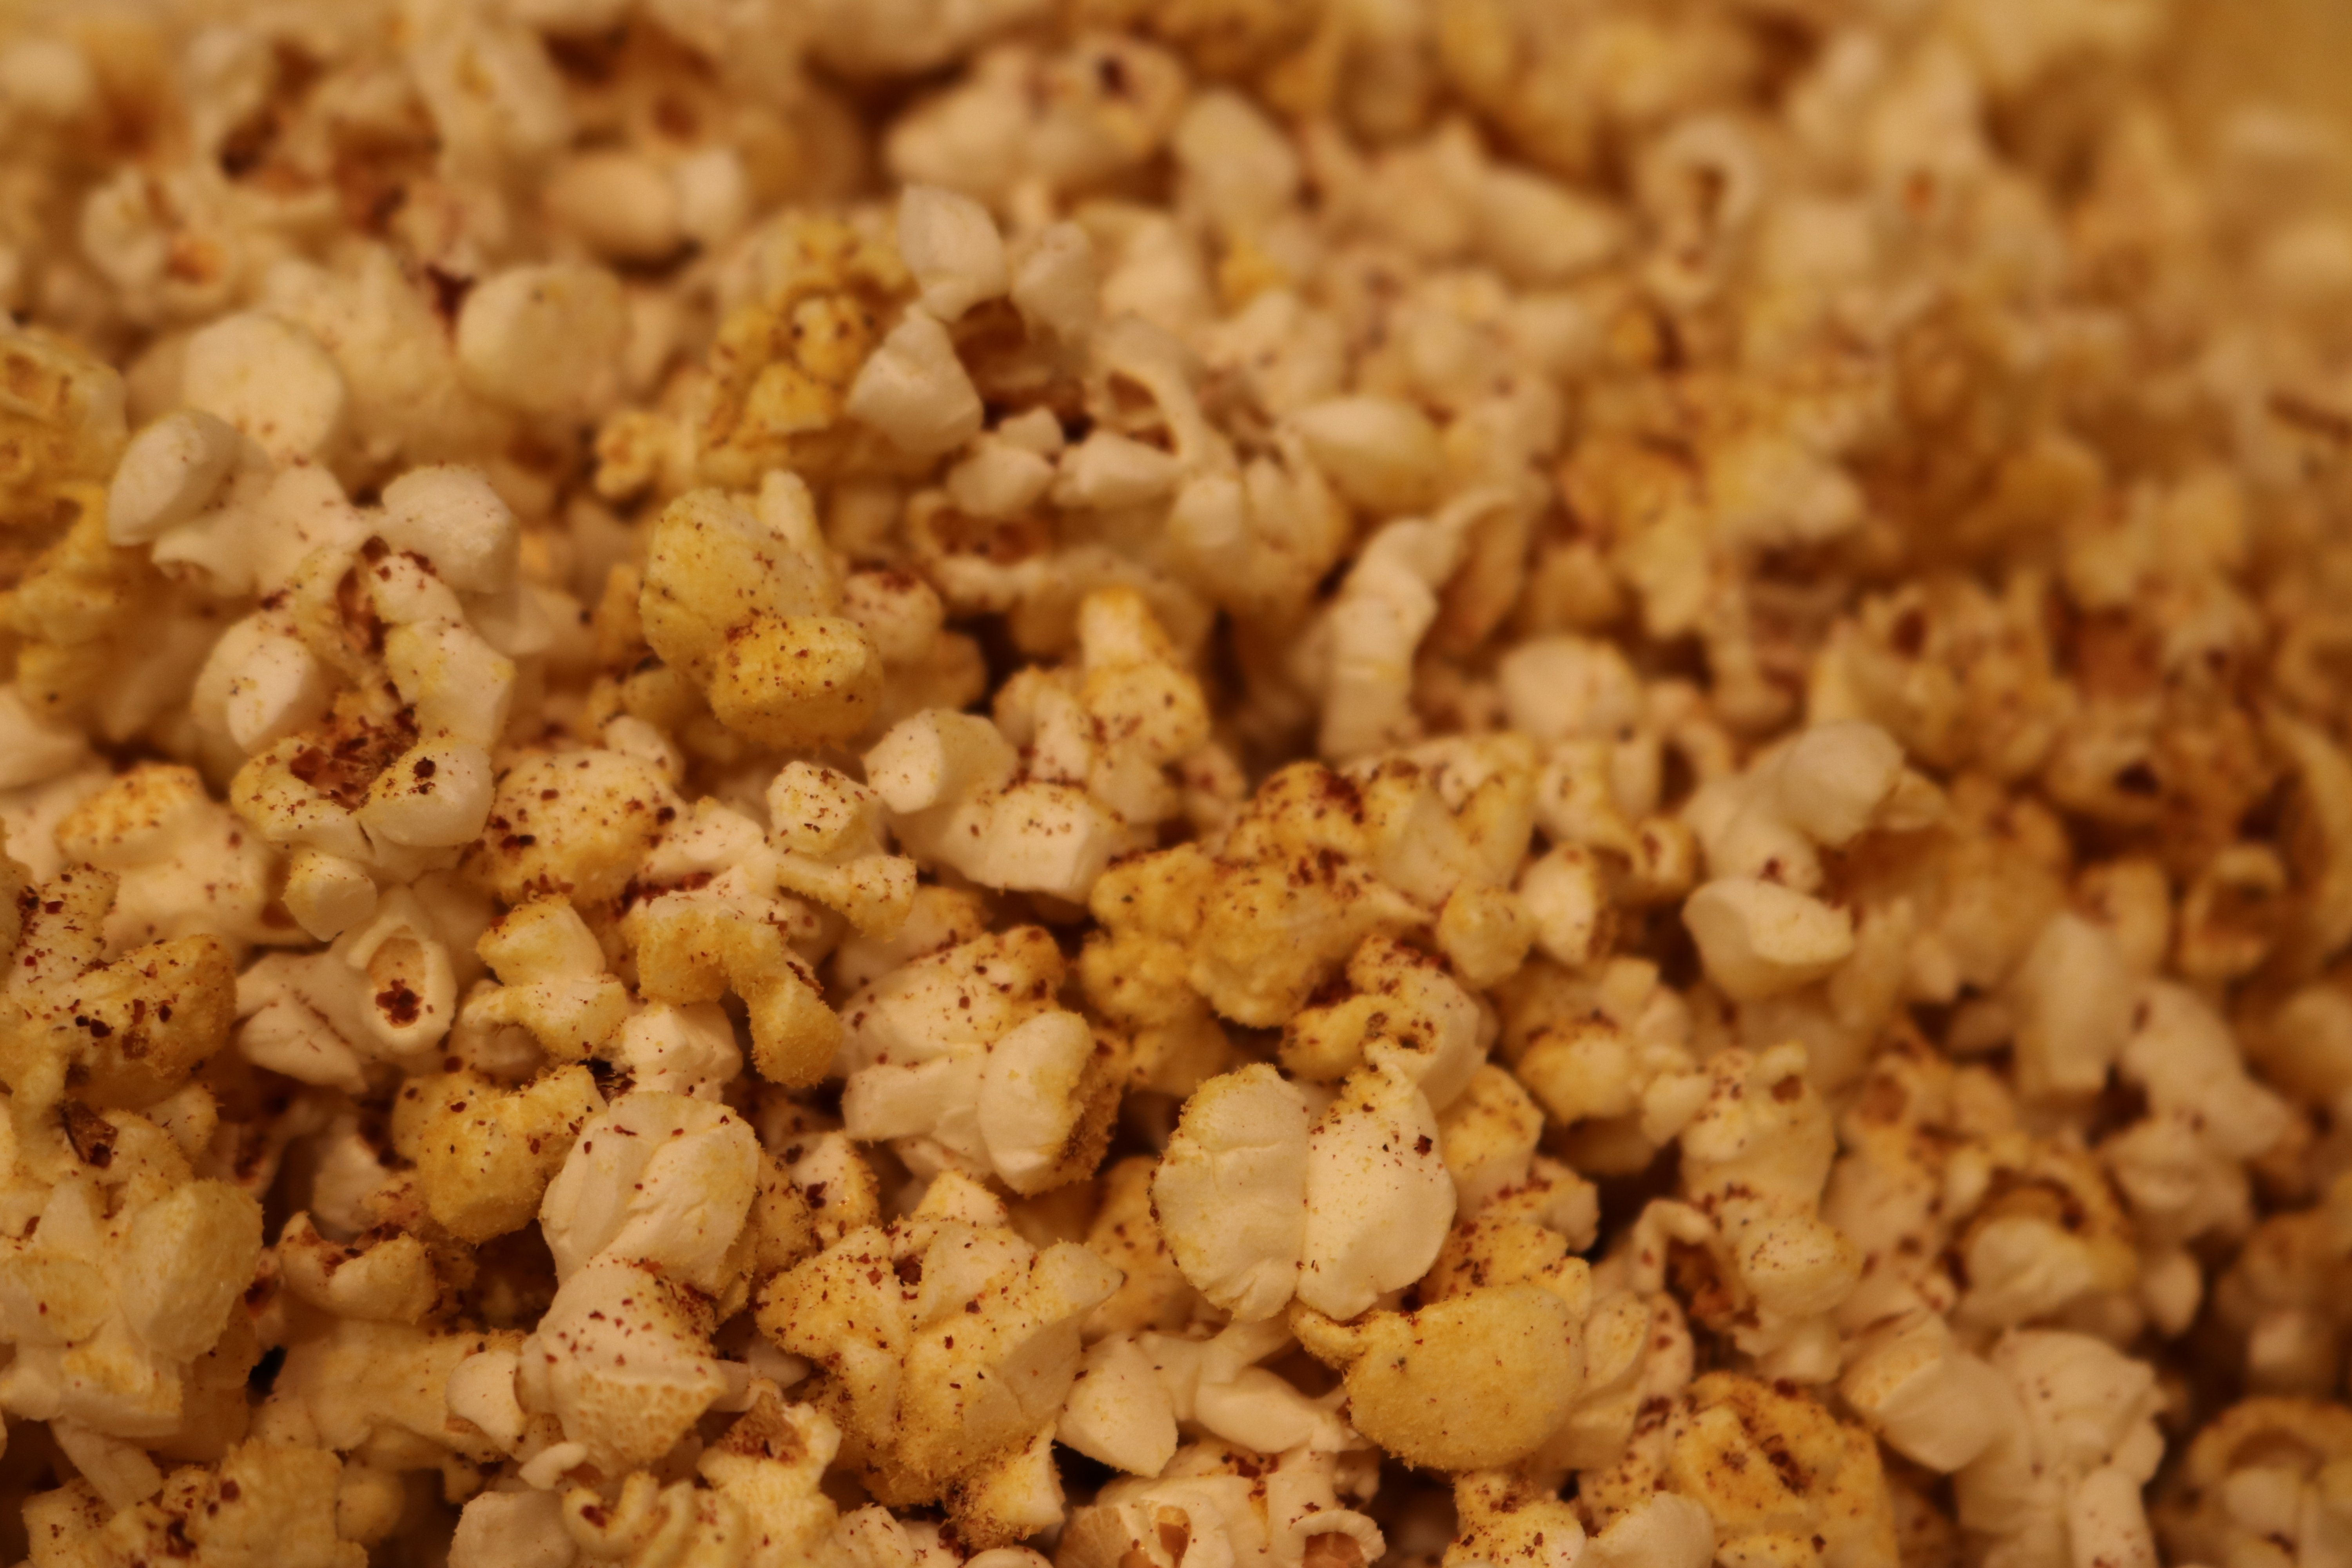 Sumac Seasoning For Popcorn and excellent Antioxidant!